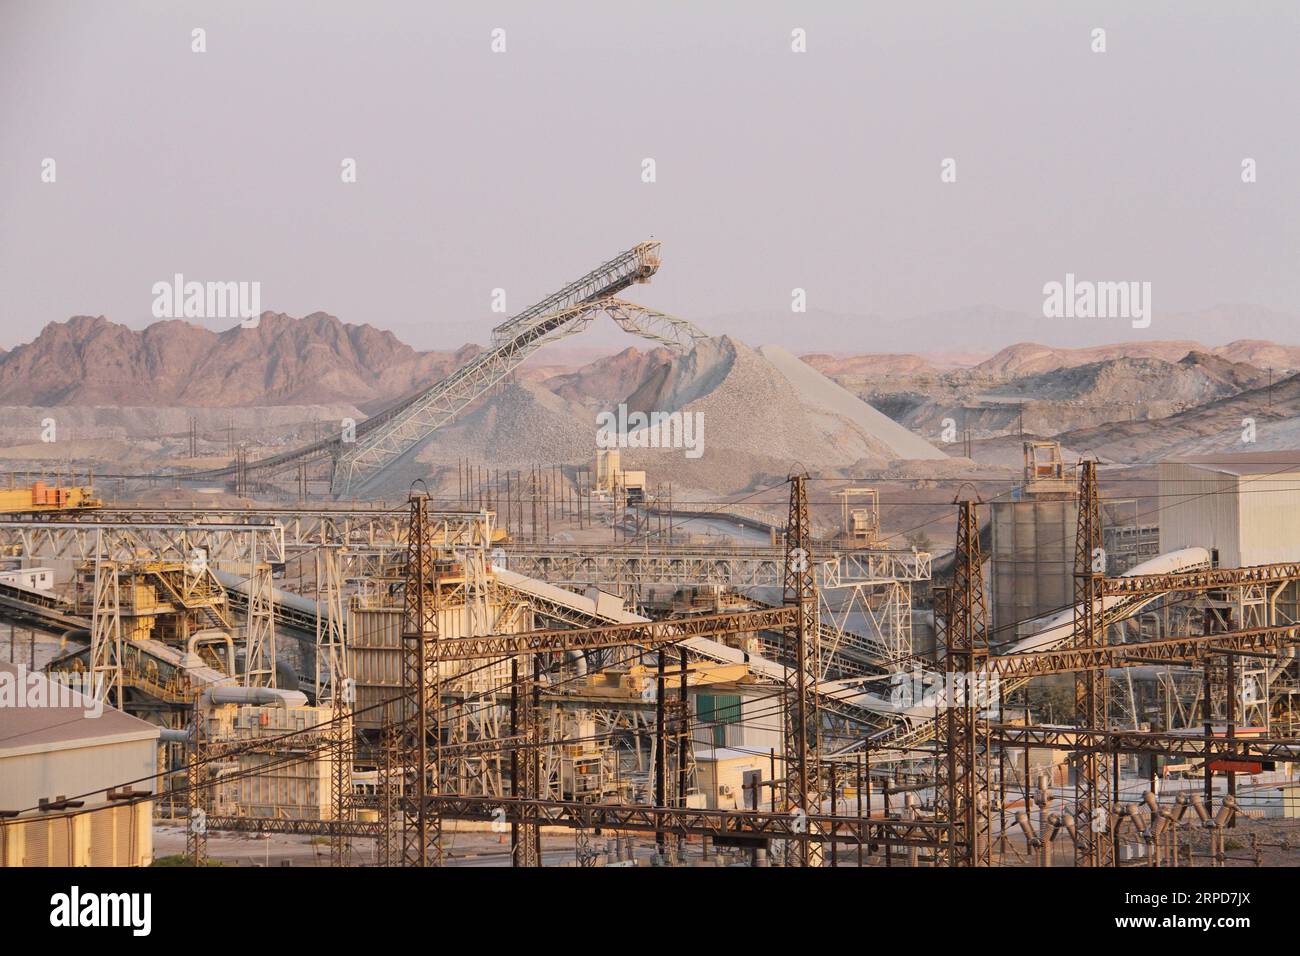 190725 -- SWAKOPMUND NAMIBIA, July 25, 2019 -- The photo taken on July 25, 2019 shows the Rossing Mine near the town of Swakopmund, Namibia. The Anglo-Australian mining giant Rio Tinto officially handed over Namibian uranium mine Rossing to its new majority shareholder, China National Nuclear Corporation CNNC at an event Thursday in Rossing Mine near the coastal town of Swakopmund.  NAMIBIA-SWAKOPMUND-ROSSING URANIUM MINE-CHINA-HANDOVER WuxChangwei PUBLICATIONxNOTxINxCHN Stock Photo